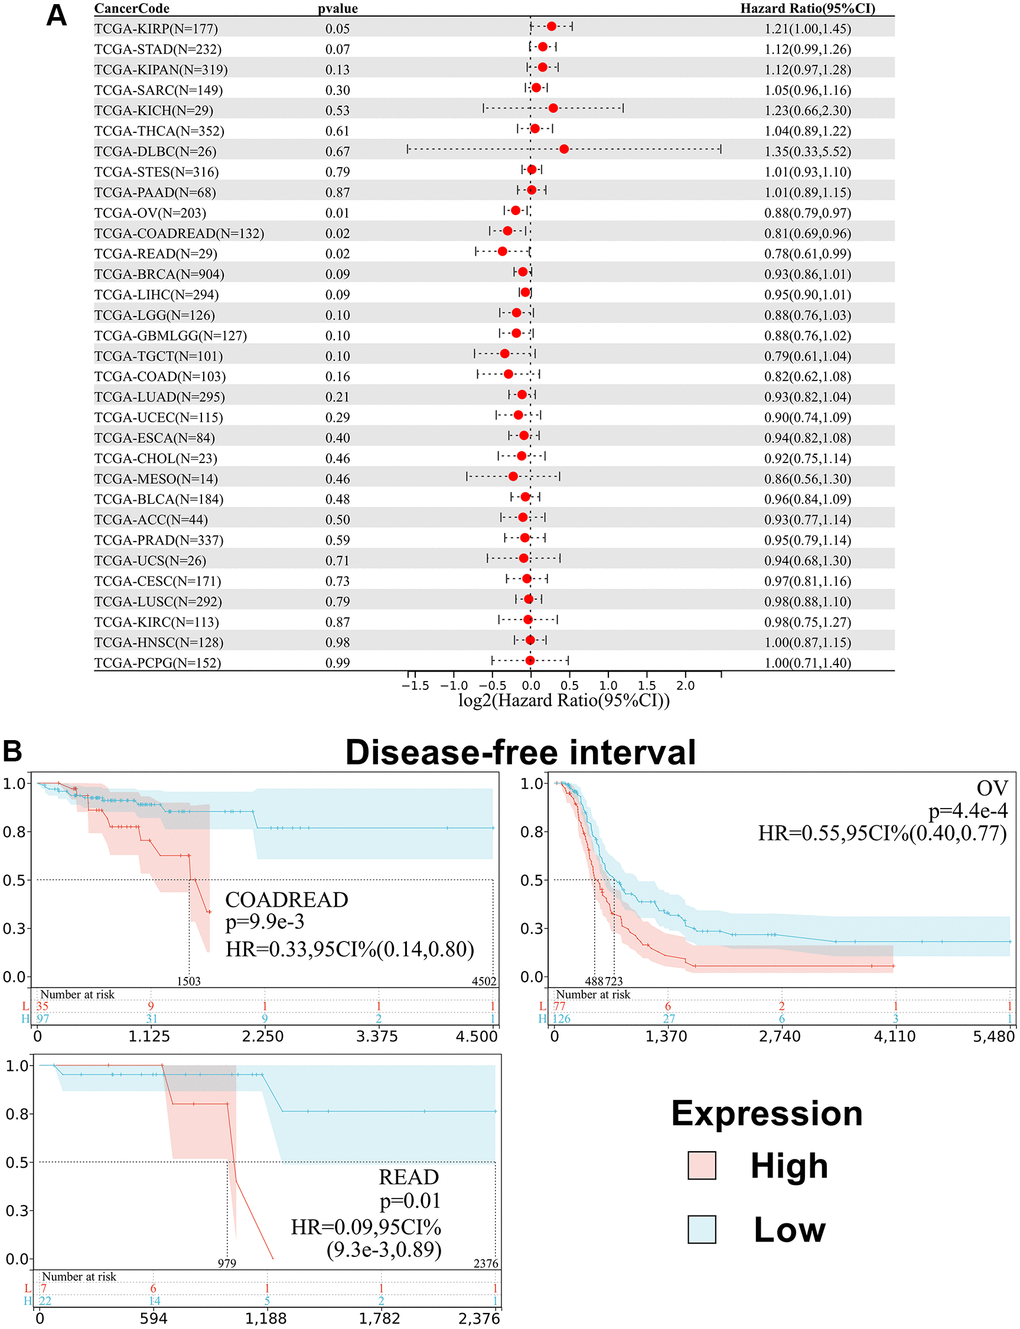 Relationship between SPIB expression and disease-free interval (DFI) in pan-cancer. (A) Cox regression analysis of SPIB in 44 tumors. (B) Kaplan-Meier OS curves of SPIB expression in patients with COADREAD, OV, and READ. The vertical coordinate is the survival probability, and the horizontal coordinate is the survival time (days).